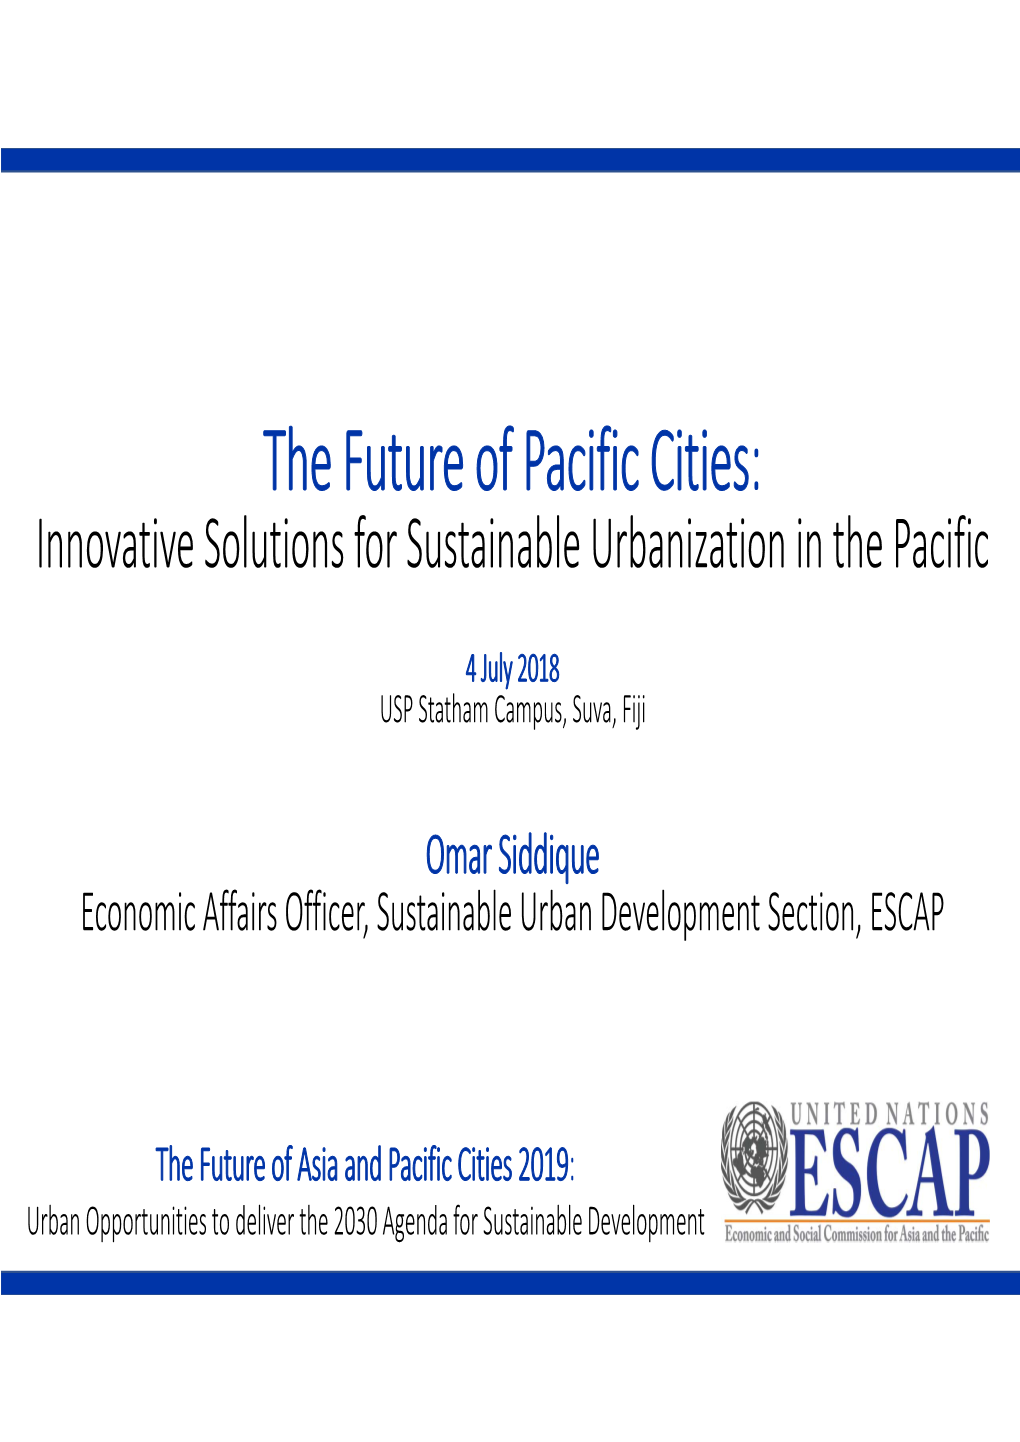 The Future of Pacific Cities: Innovative Solutions for Sustainable Urbanization in the Pacific